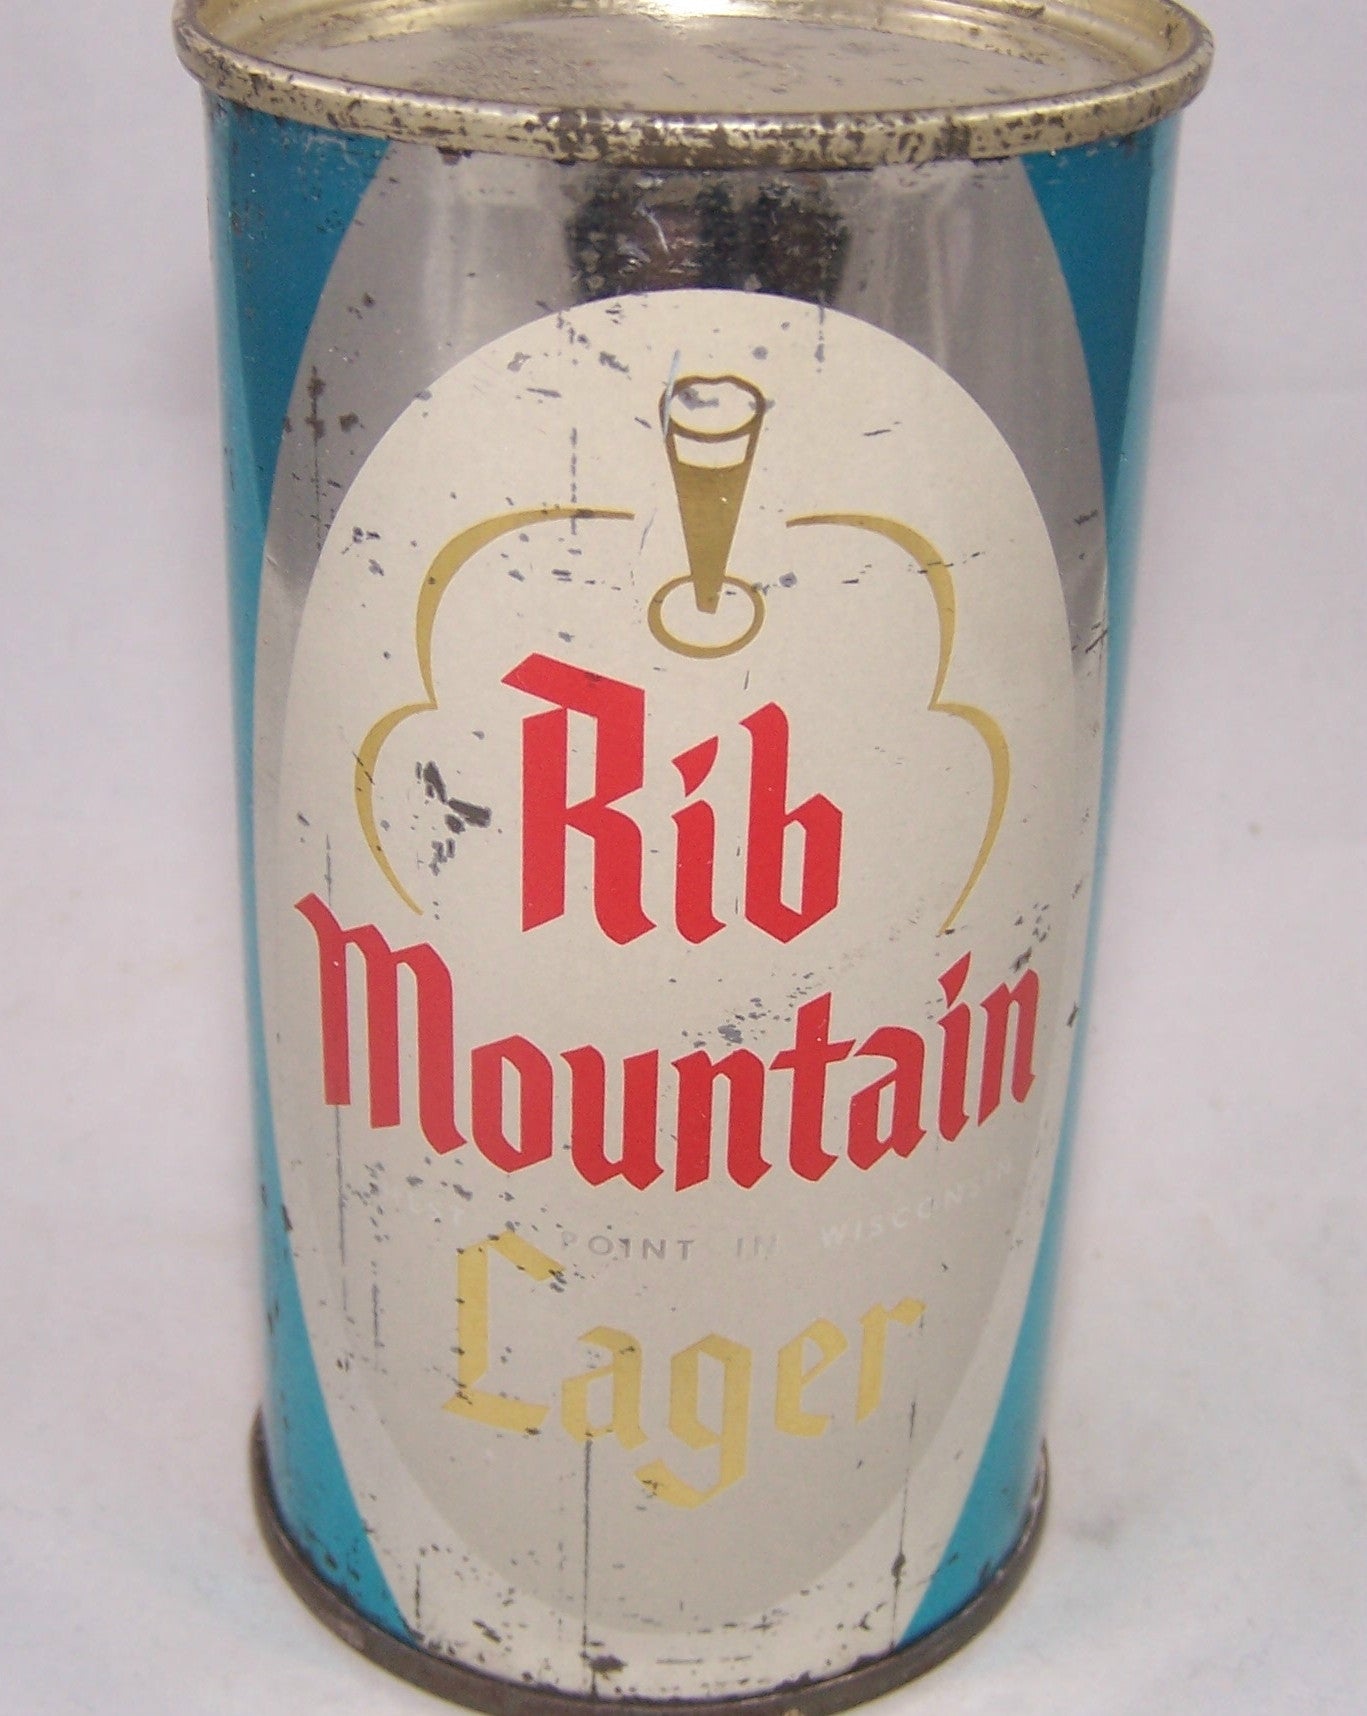 Rib Mountain Lager Beer, USBC 124-35, Grade 1- Sold on 03/22/17